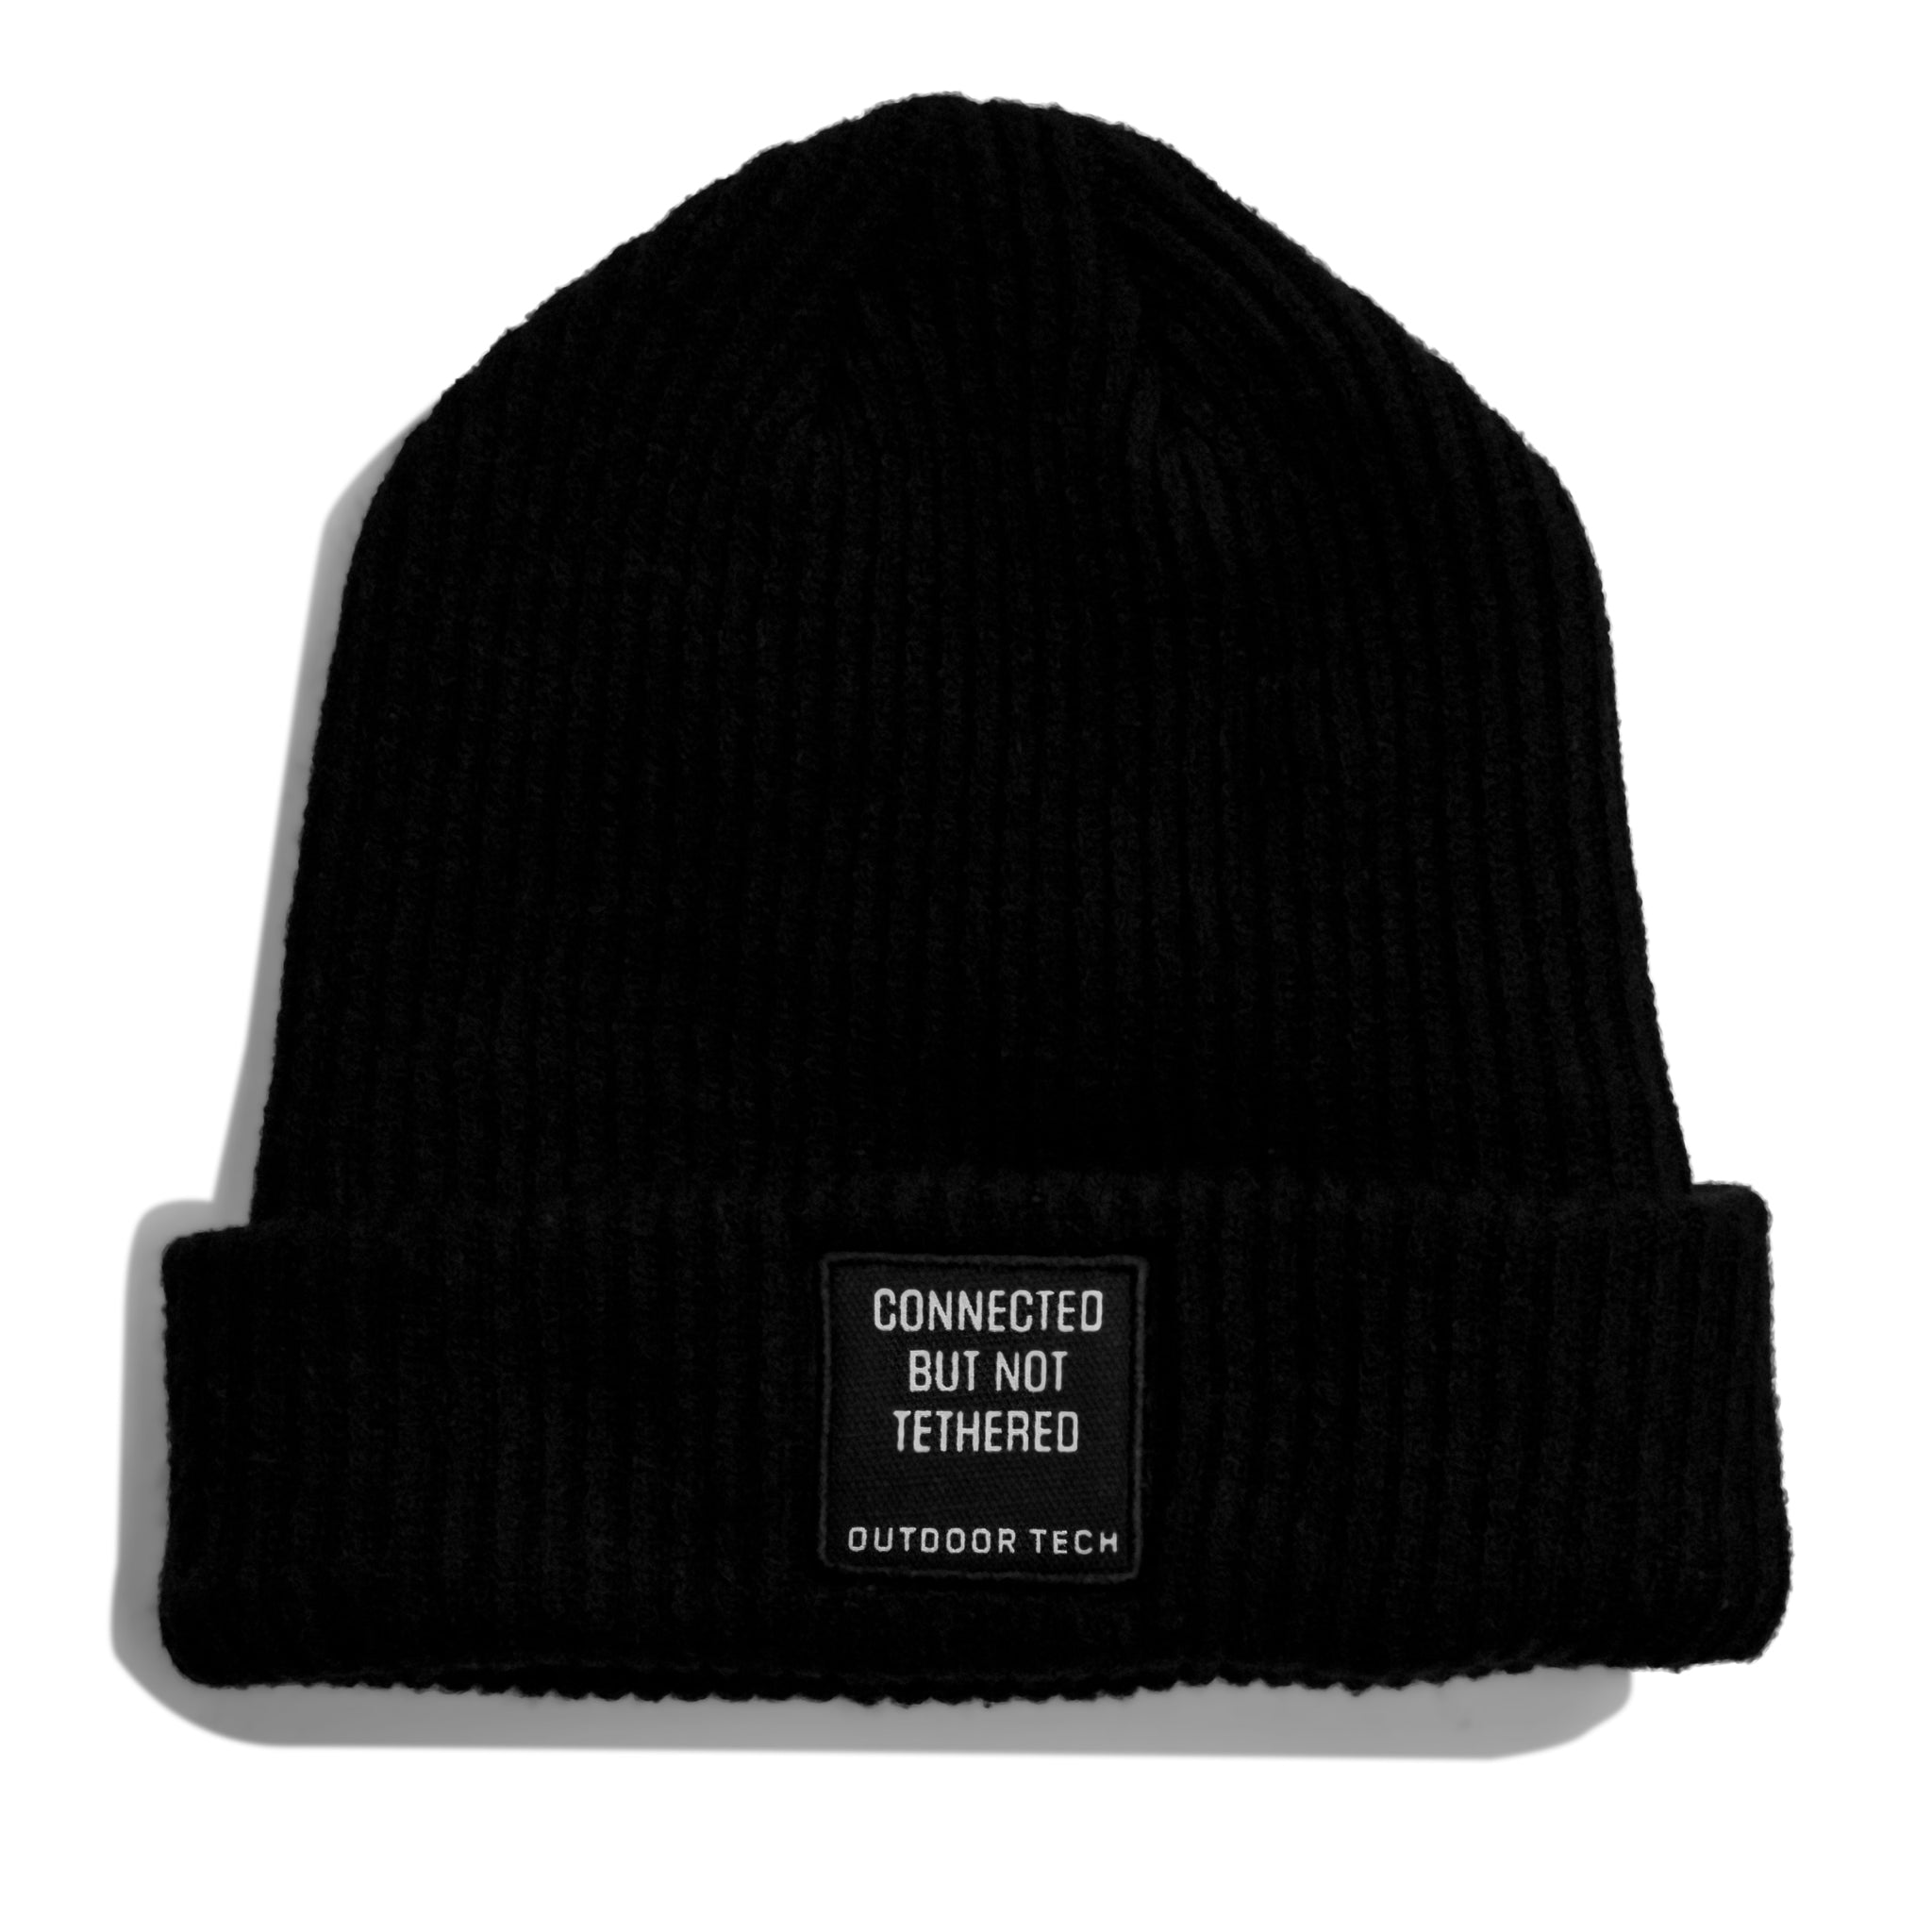 Side view of Shred Beanie with a patch that says "Connected but not Tethered"